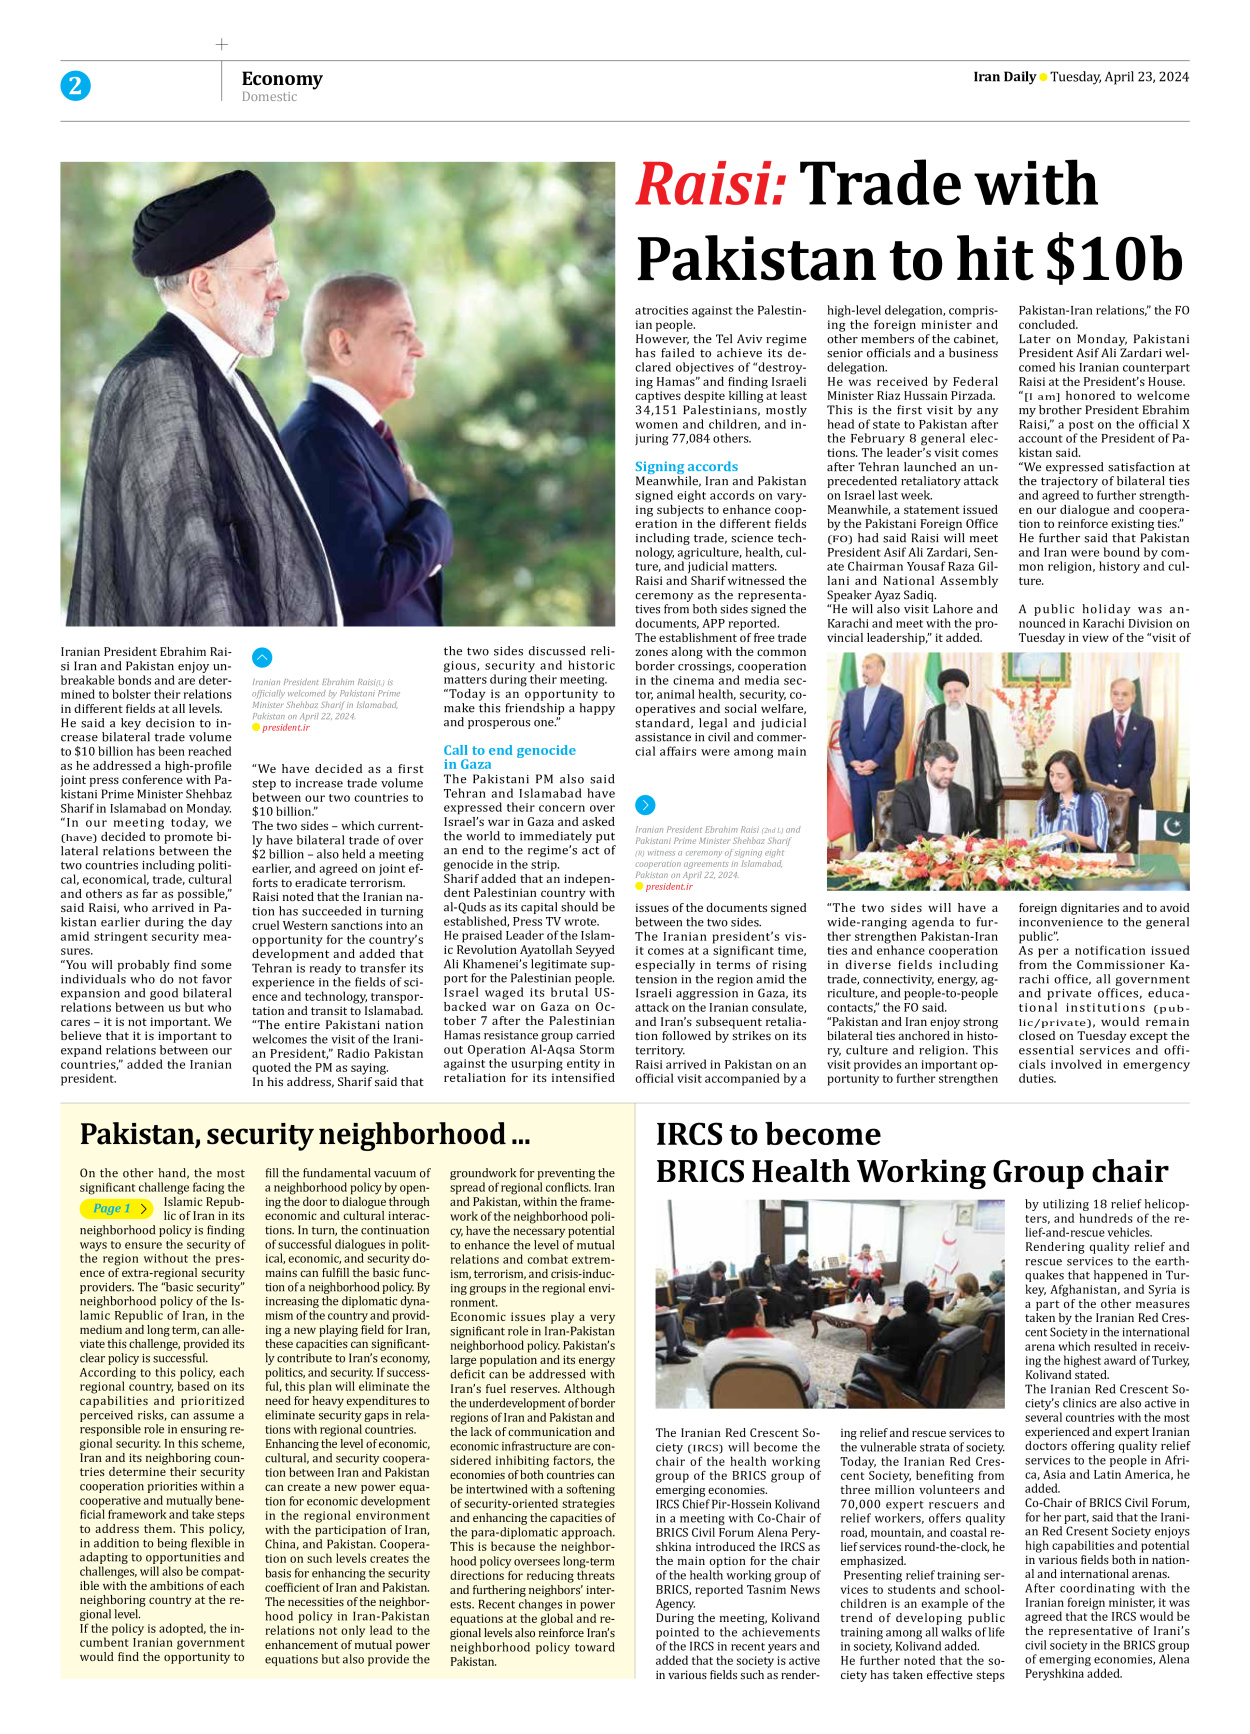 Iran Daily - Number Seven Thousand Five Hundred and Forty - 23 April 2024 - Page 2